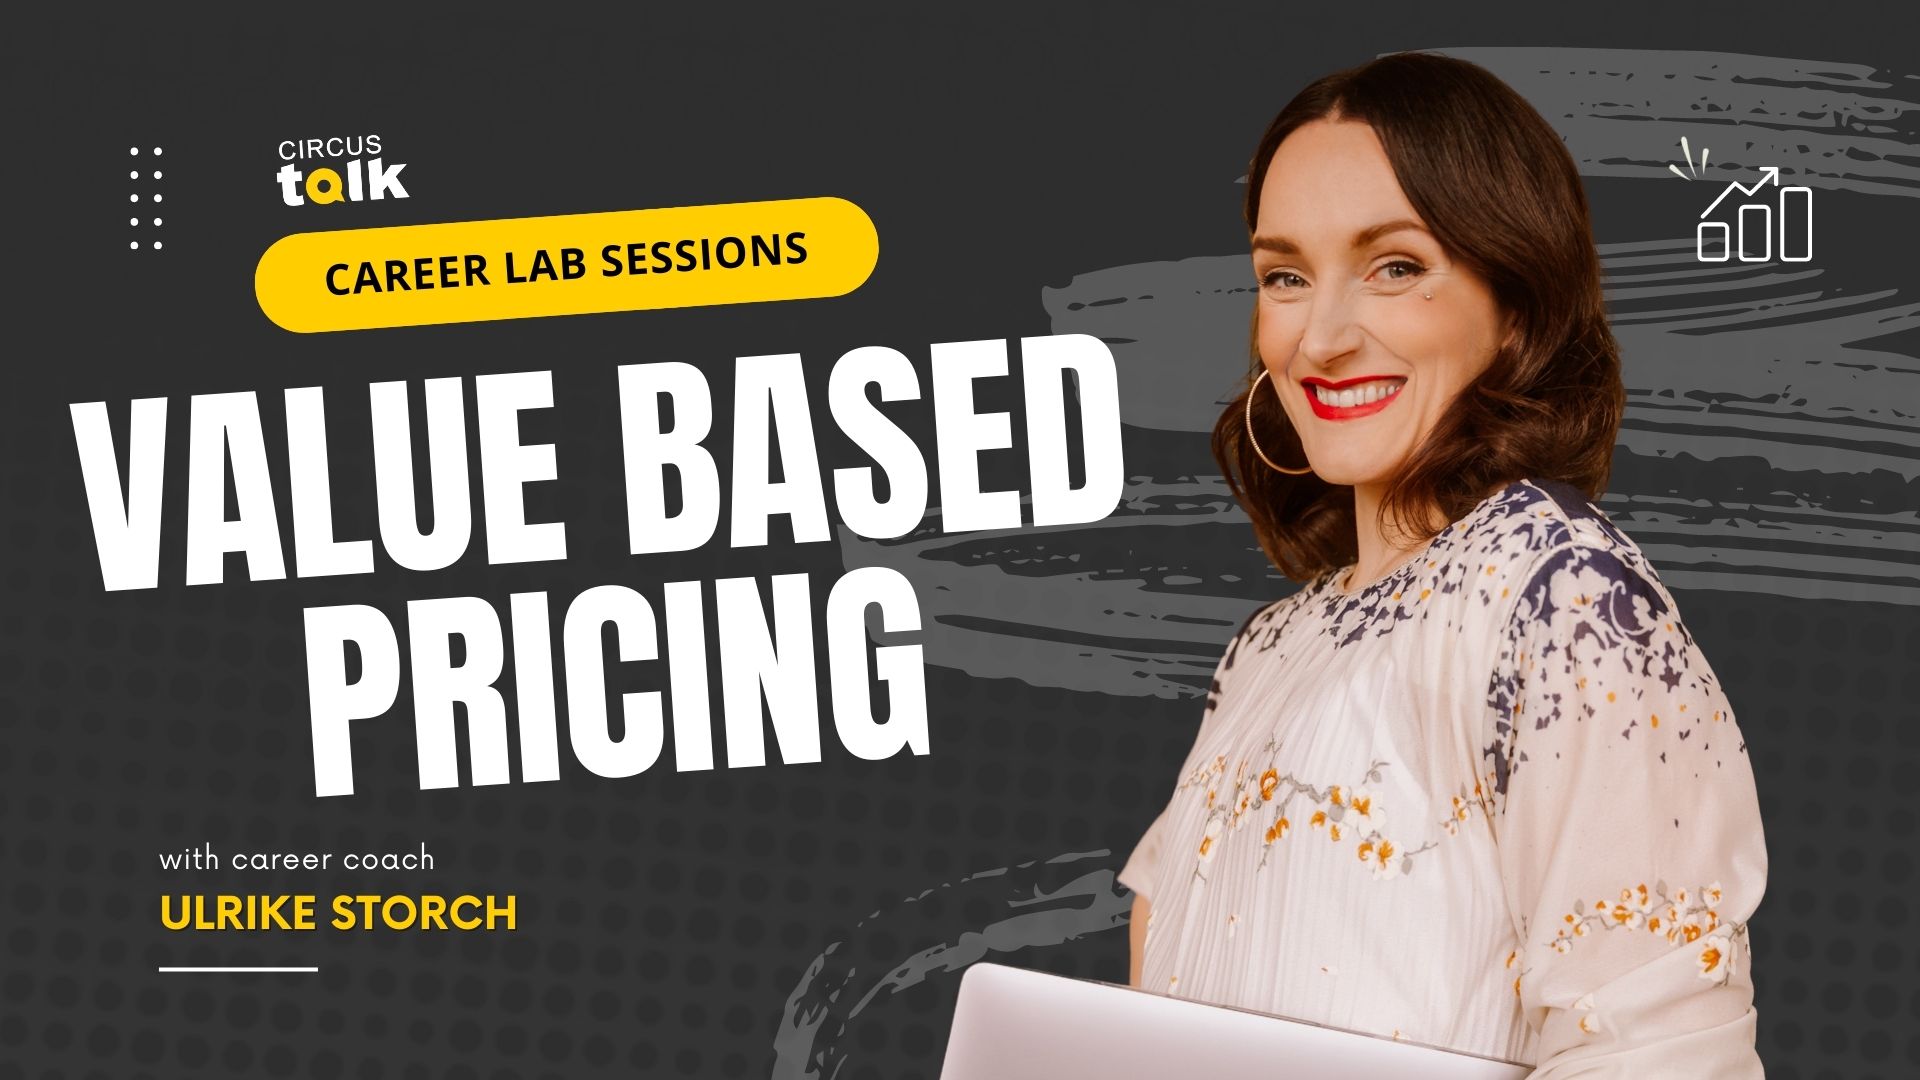 Career Lab Sessions – Value Based Pricing with Ulrike Storch